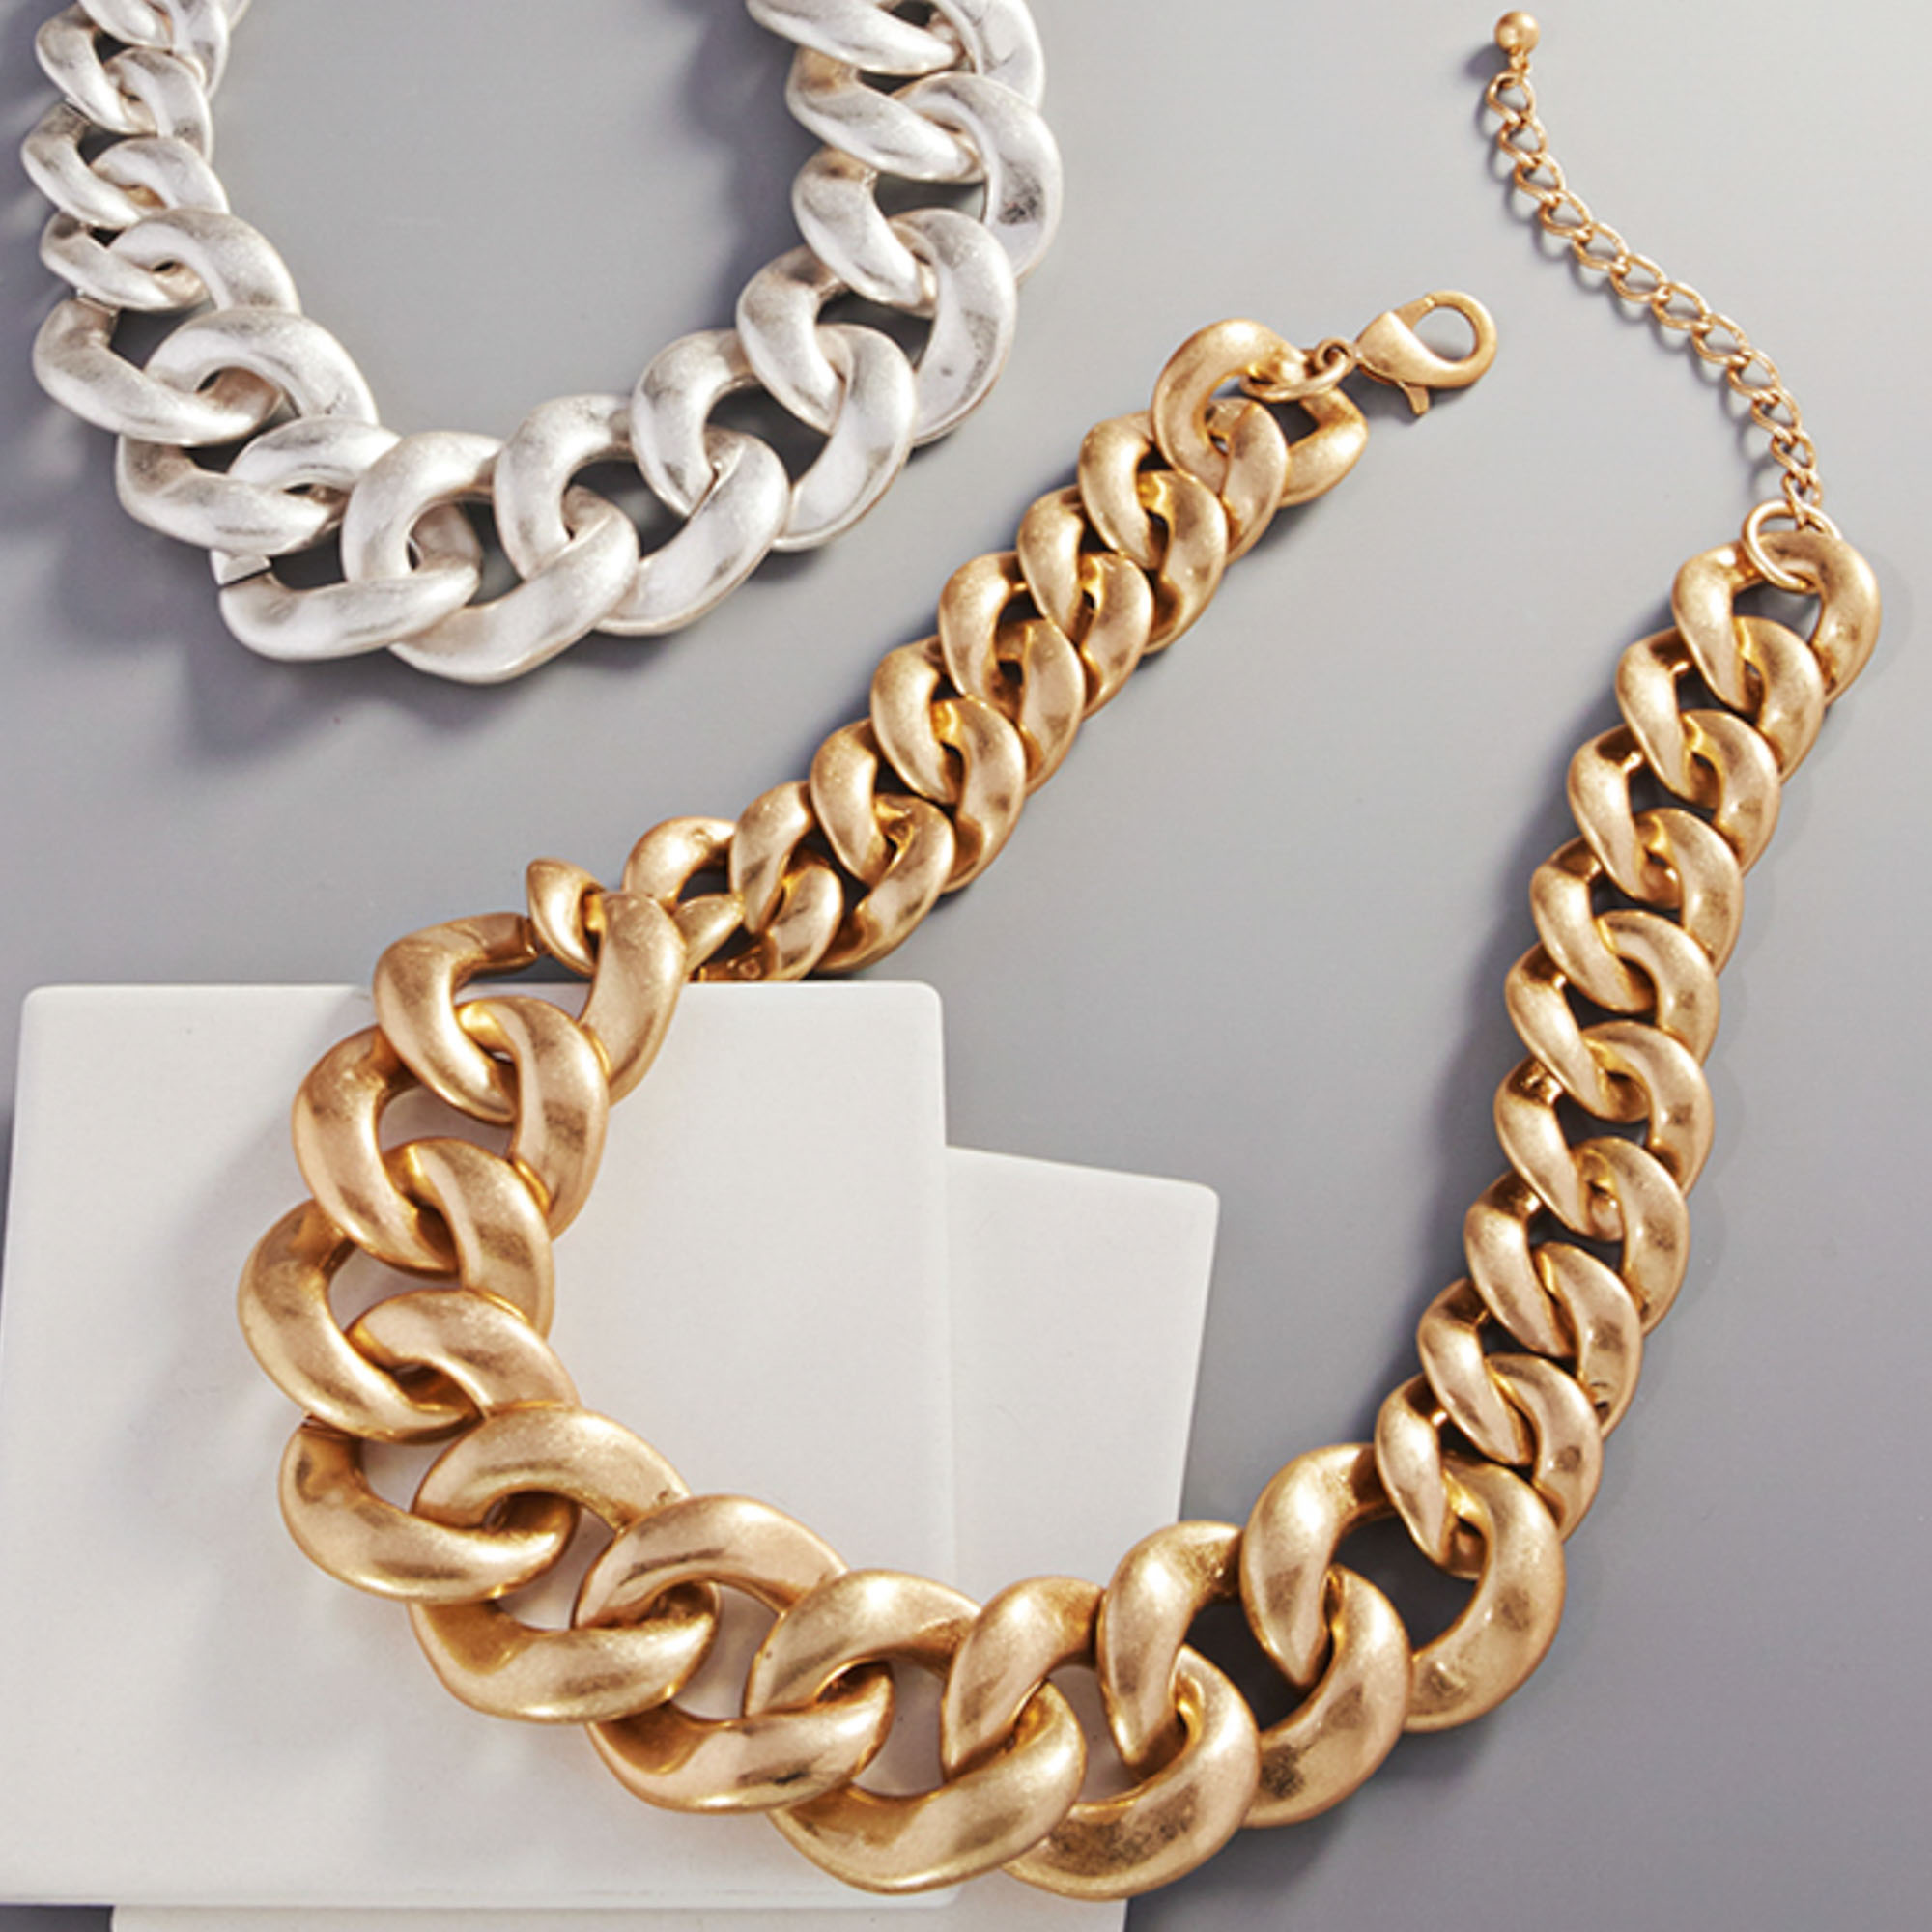 IRREGULAR SHAPED CHUNKY CHAIN CLASP NECKLACE